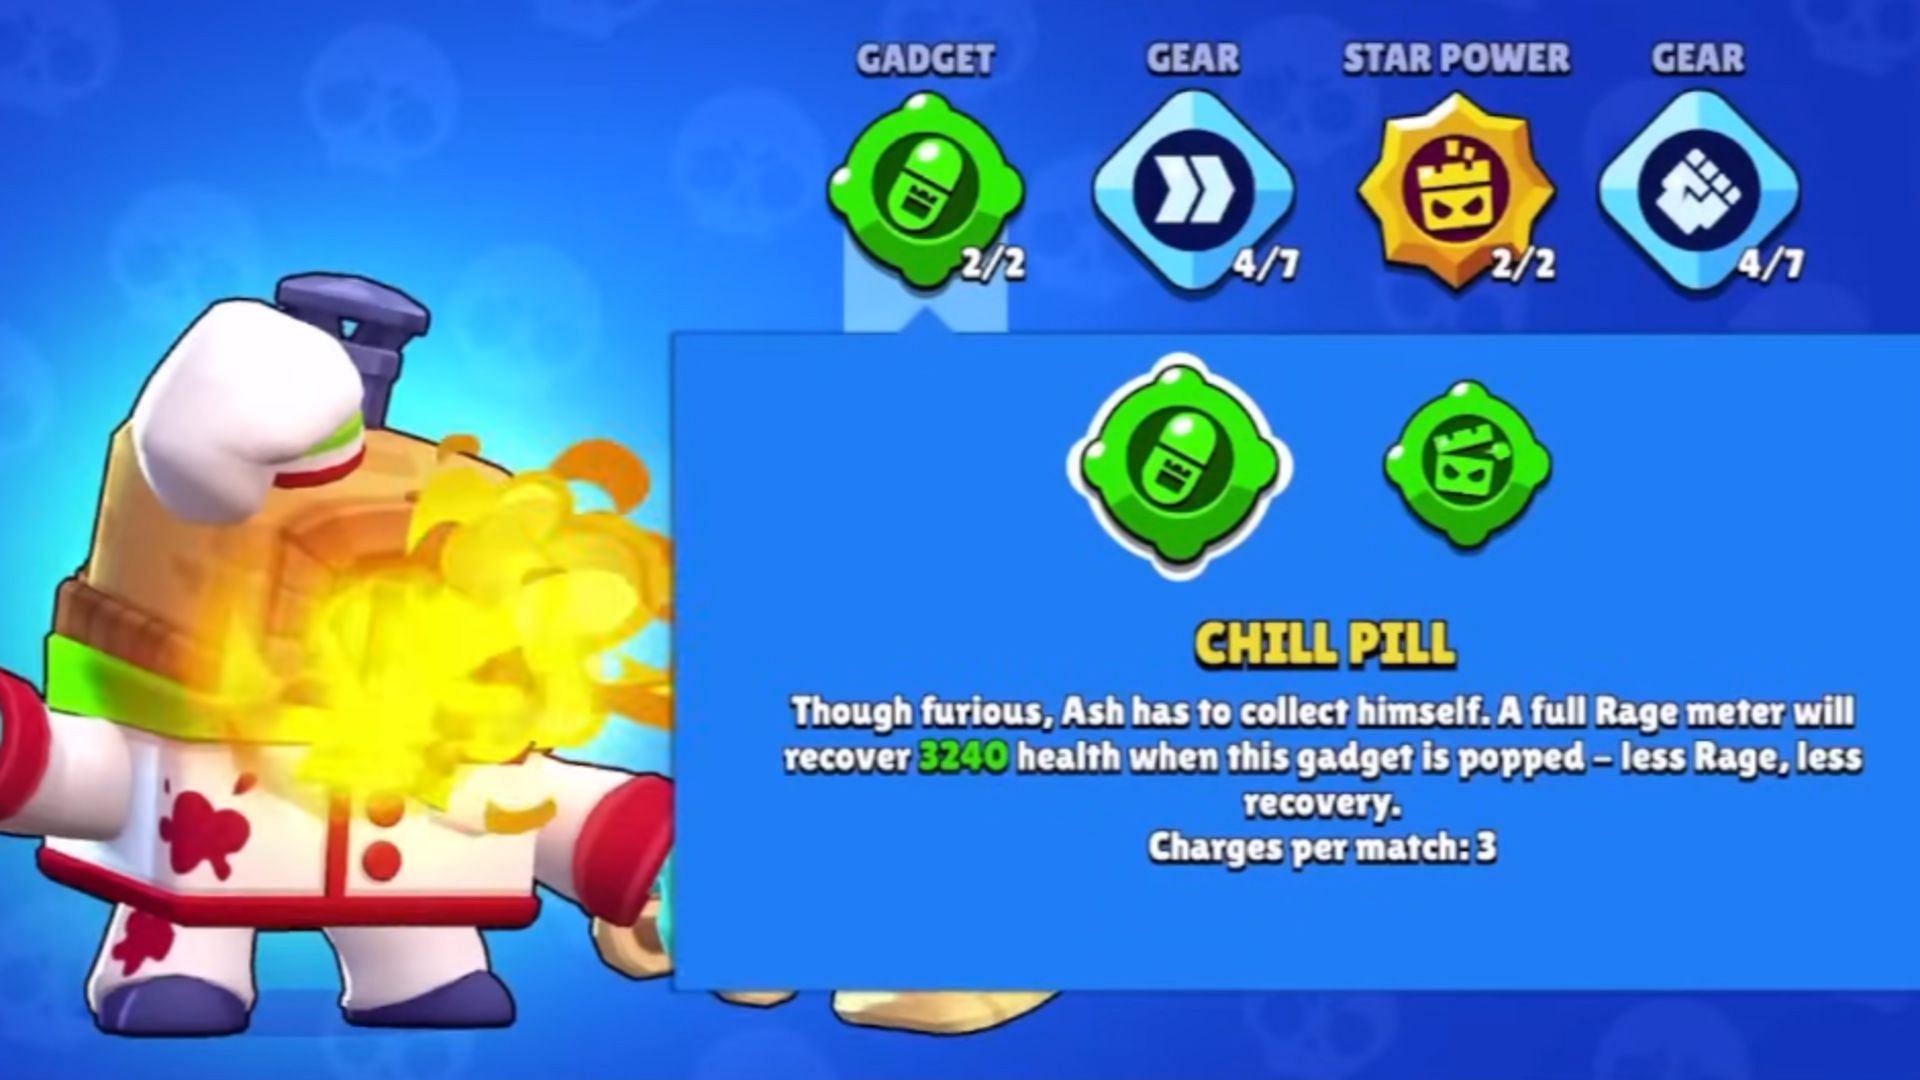 Chill Pill Gadget (Image via Supercell)